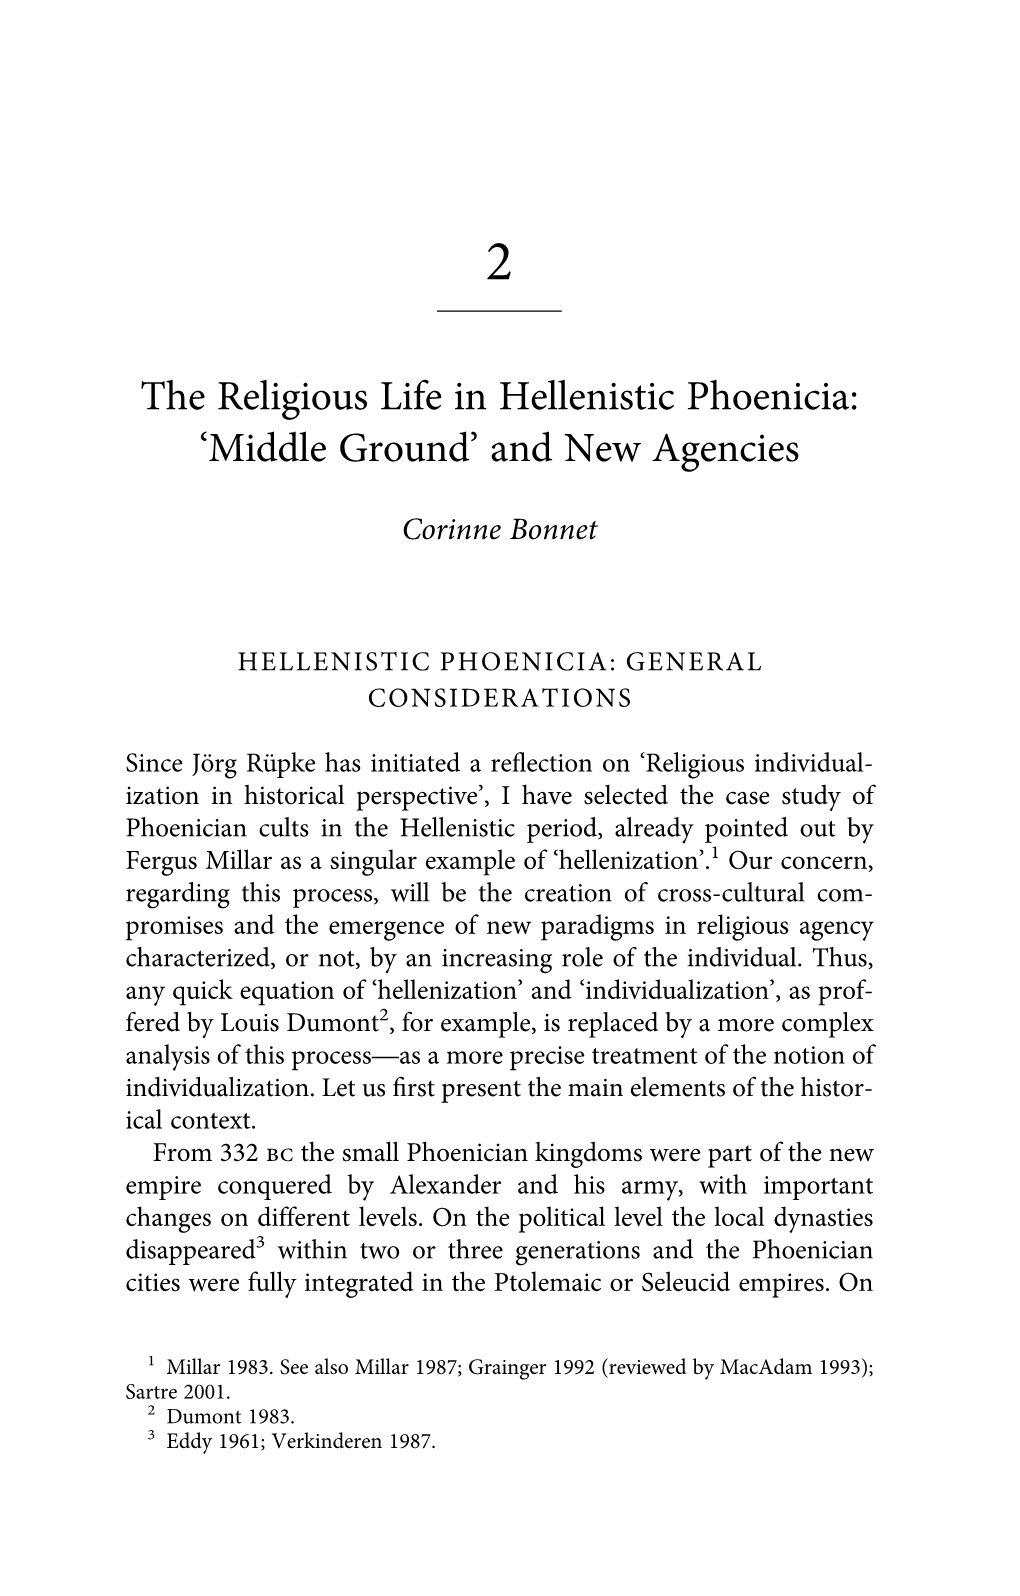 The Religious Life in Hellenistic Phoenicia: ‘Middle Ground’ and New Agencies